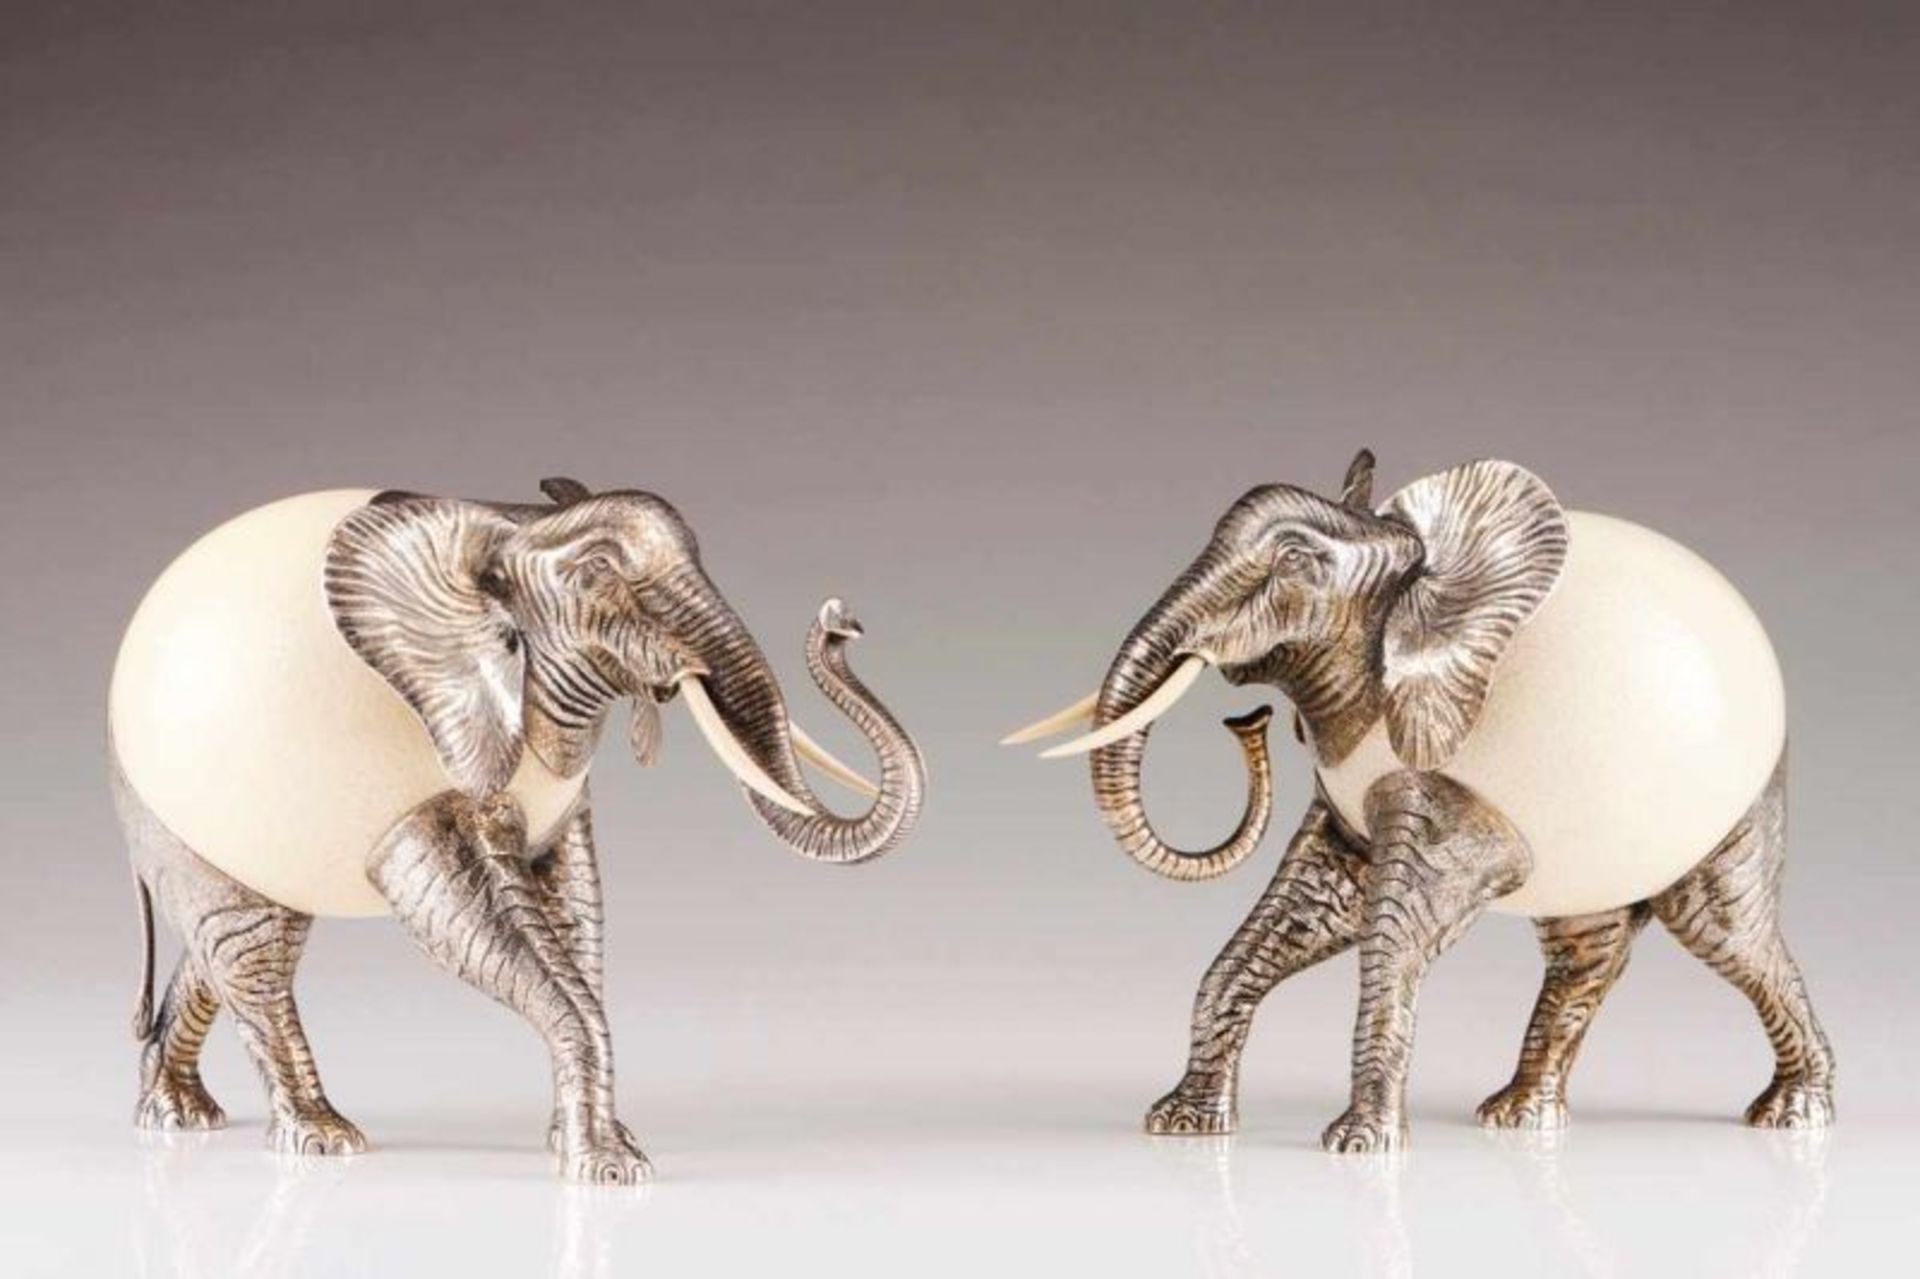 Elephant A Portuguese silver sculpture, ostrich egg body, ivory tusks Porto assay mark (after 1985)